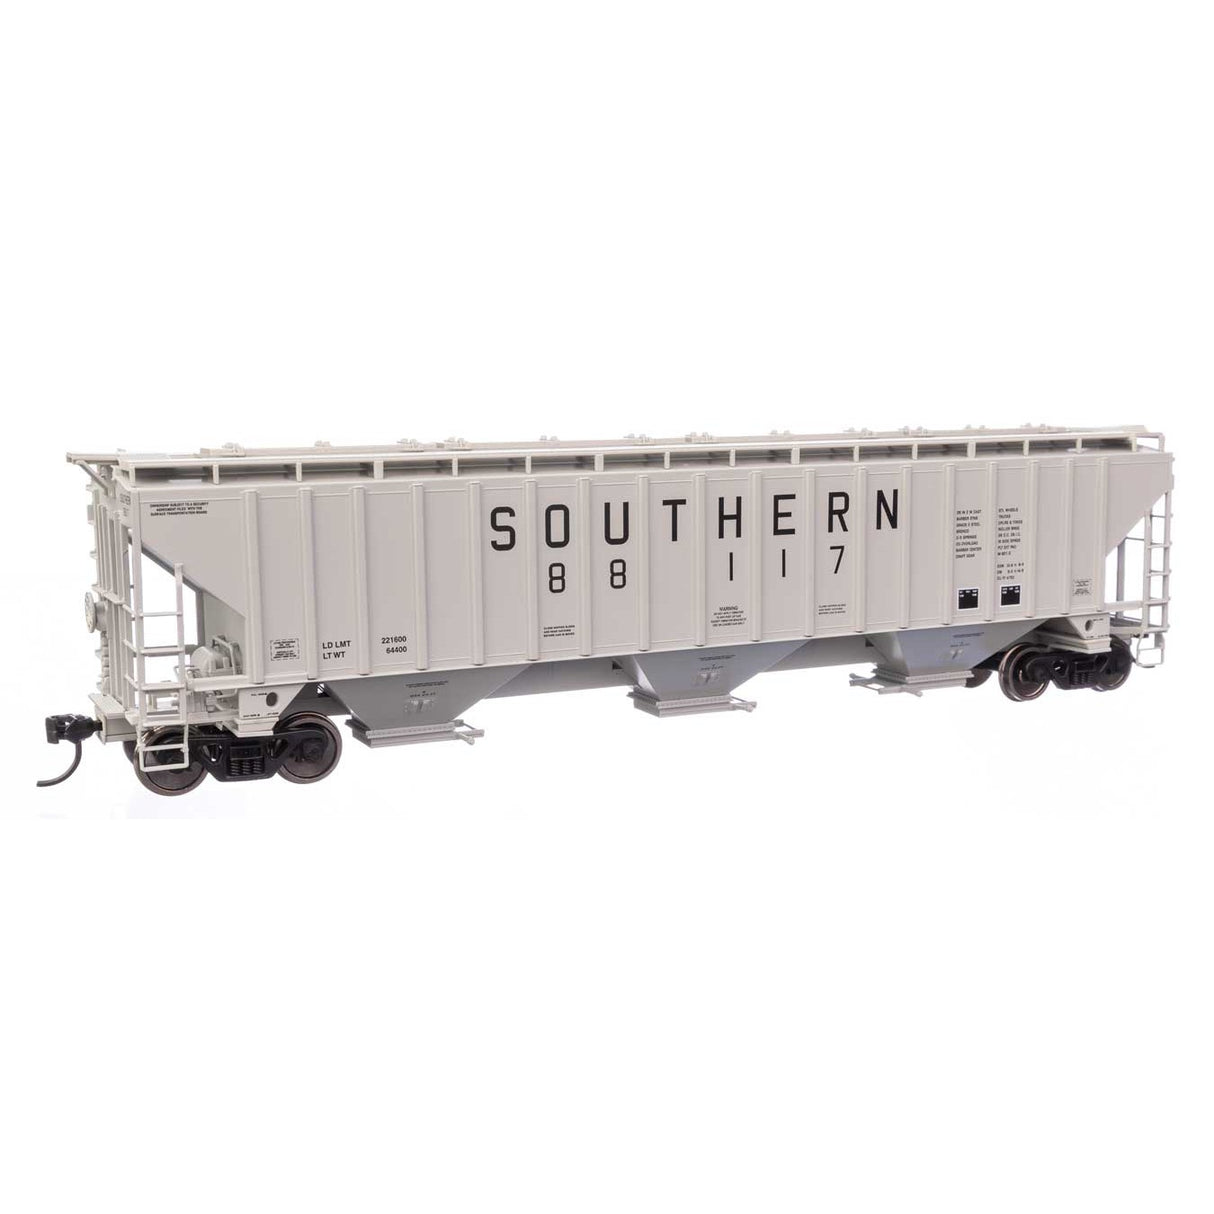 Walthers Mainline HO Scale Southern 88117 Trinity 4750 Covered Hopper